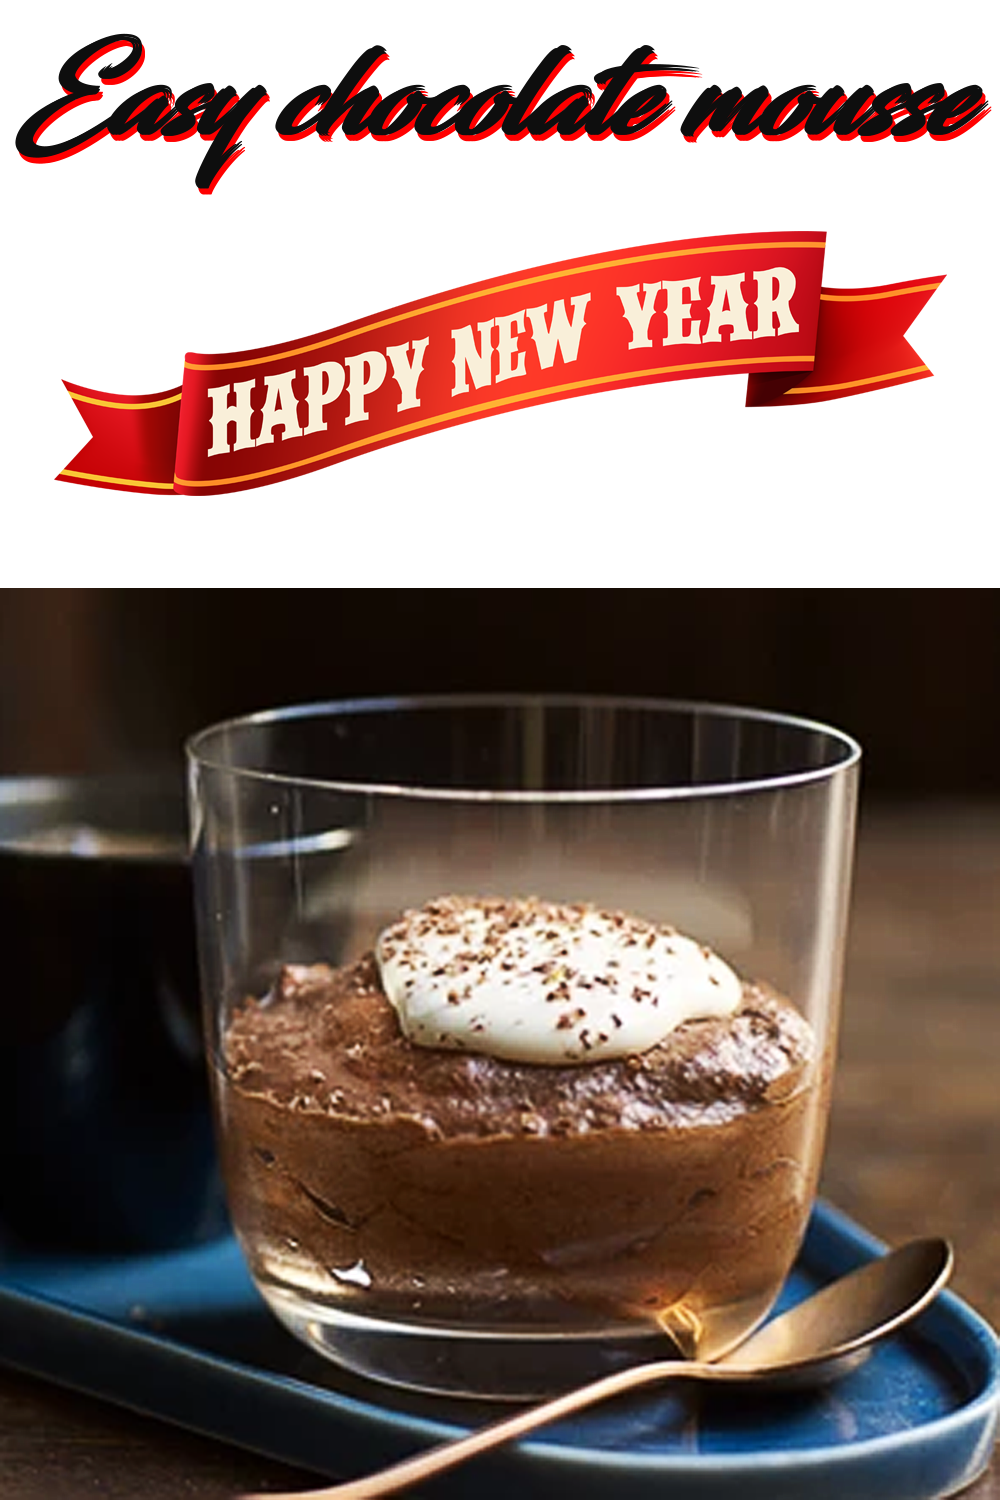 Easy Chocolate Mousse for New Year Recipe